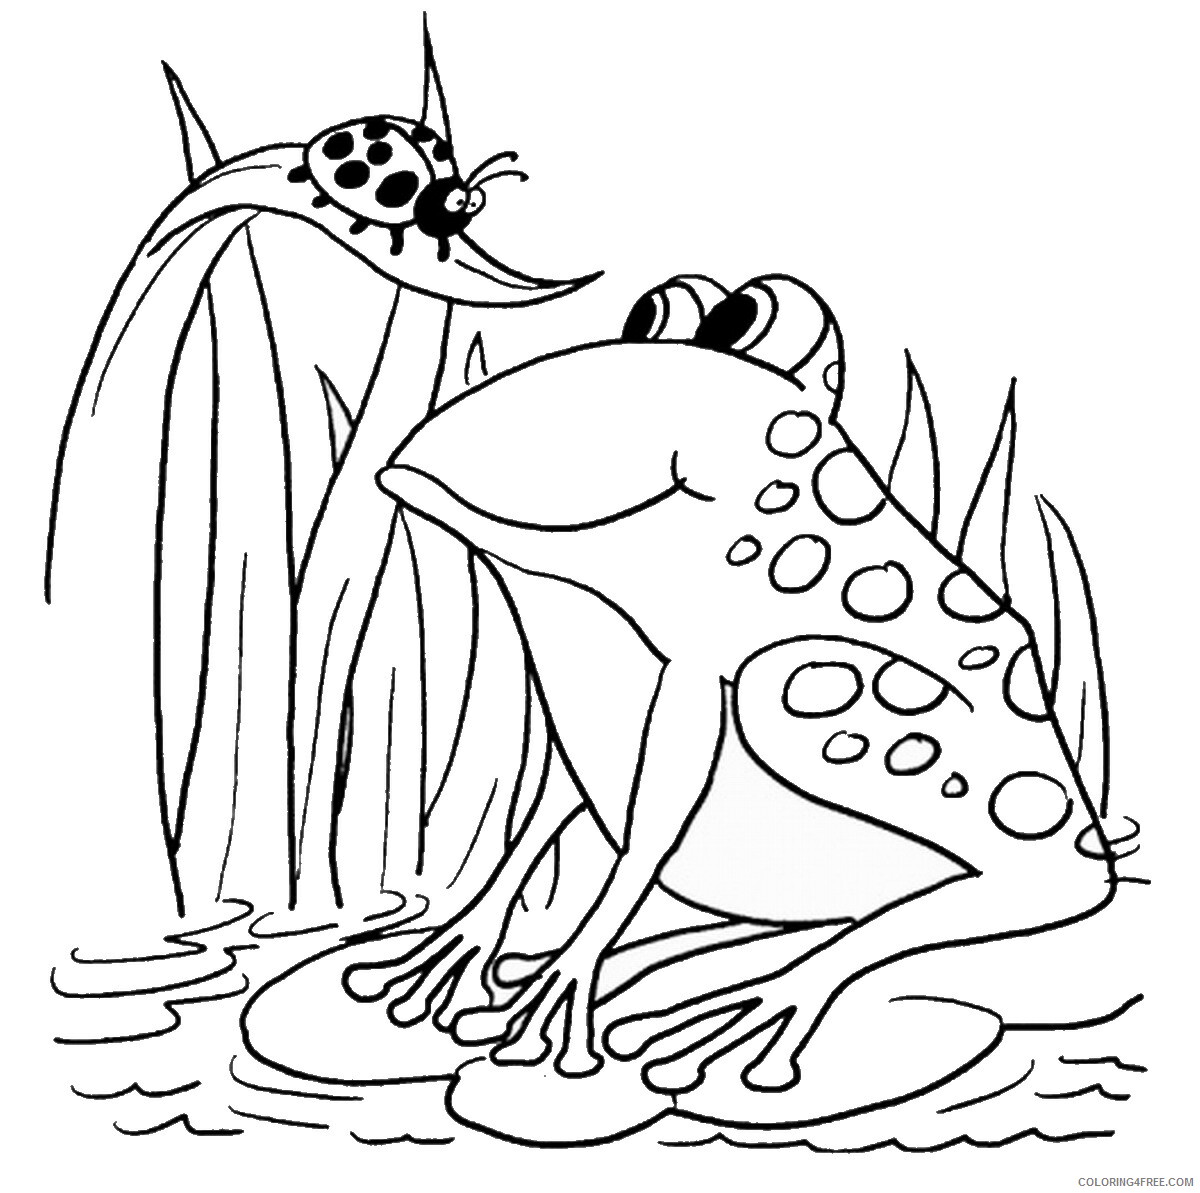 Frog Coloring Pages Animal Printable Sheets frog_cl_15 2021 2287 Coloring4free